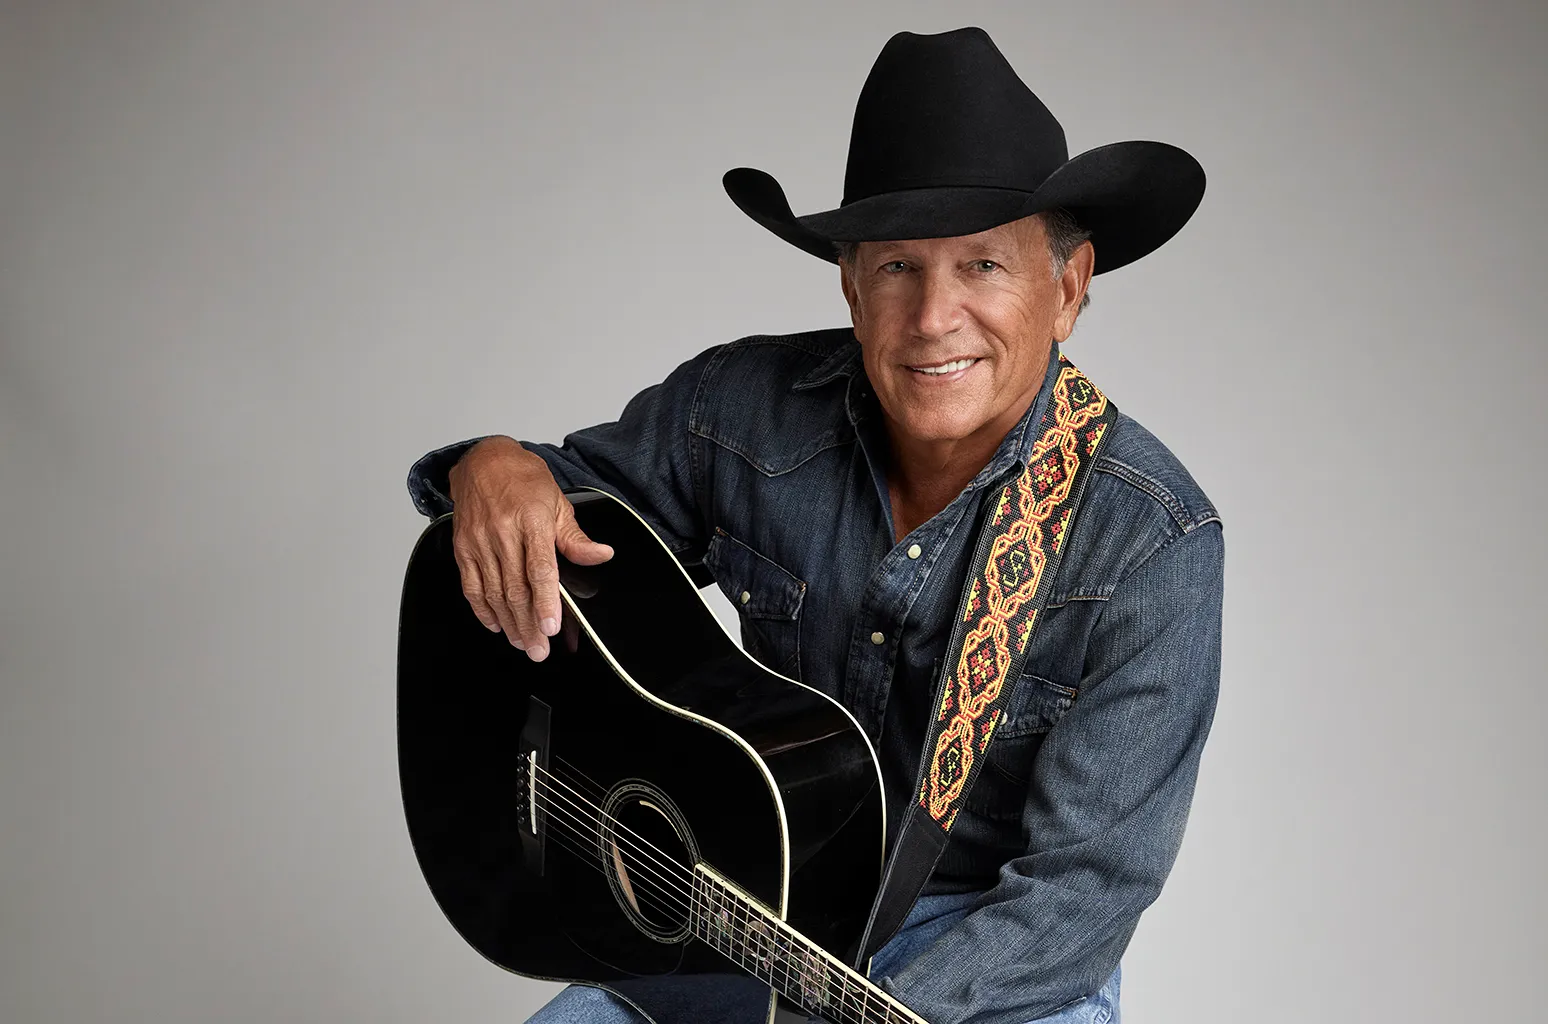 Where George Strait From